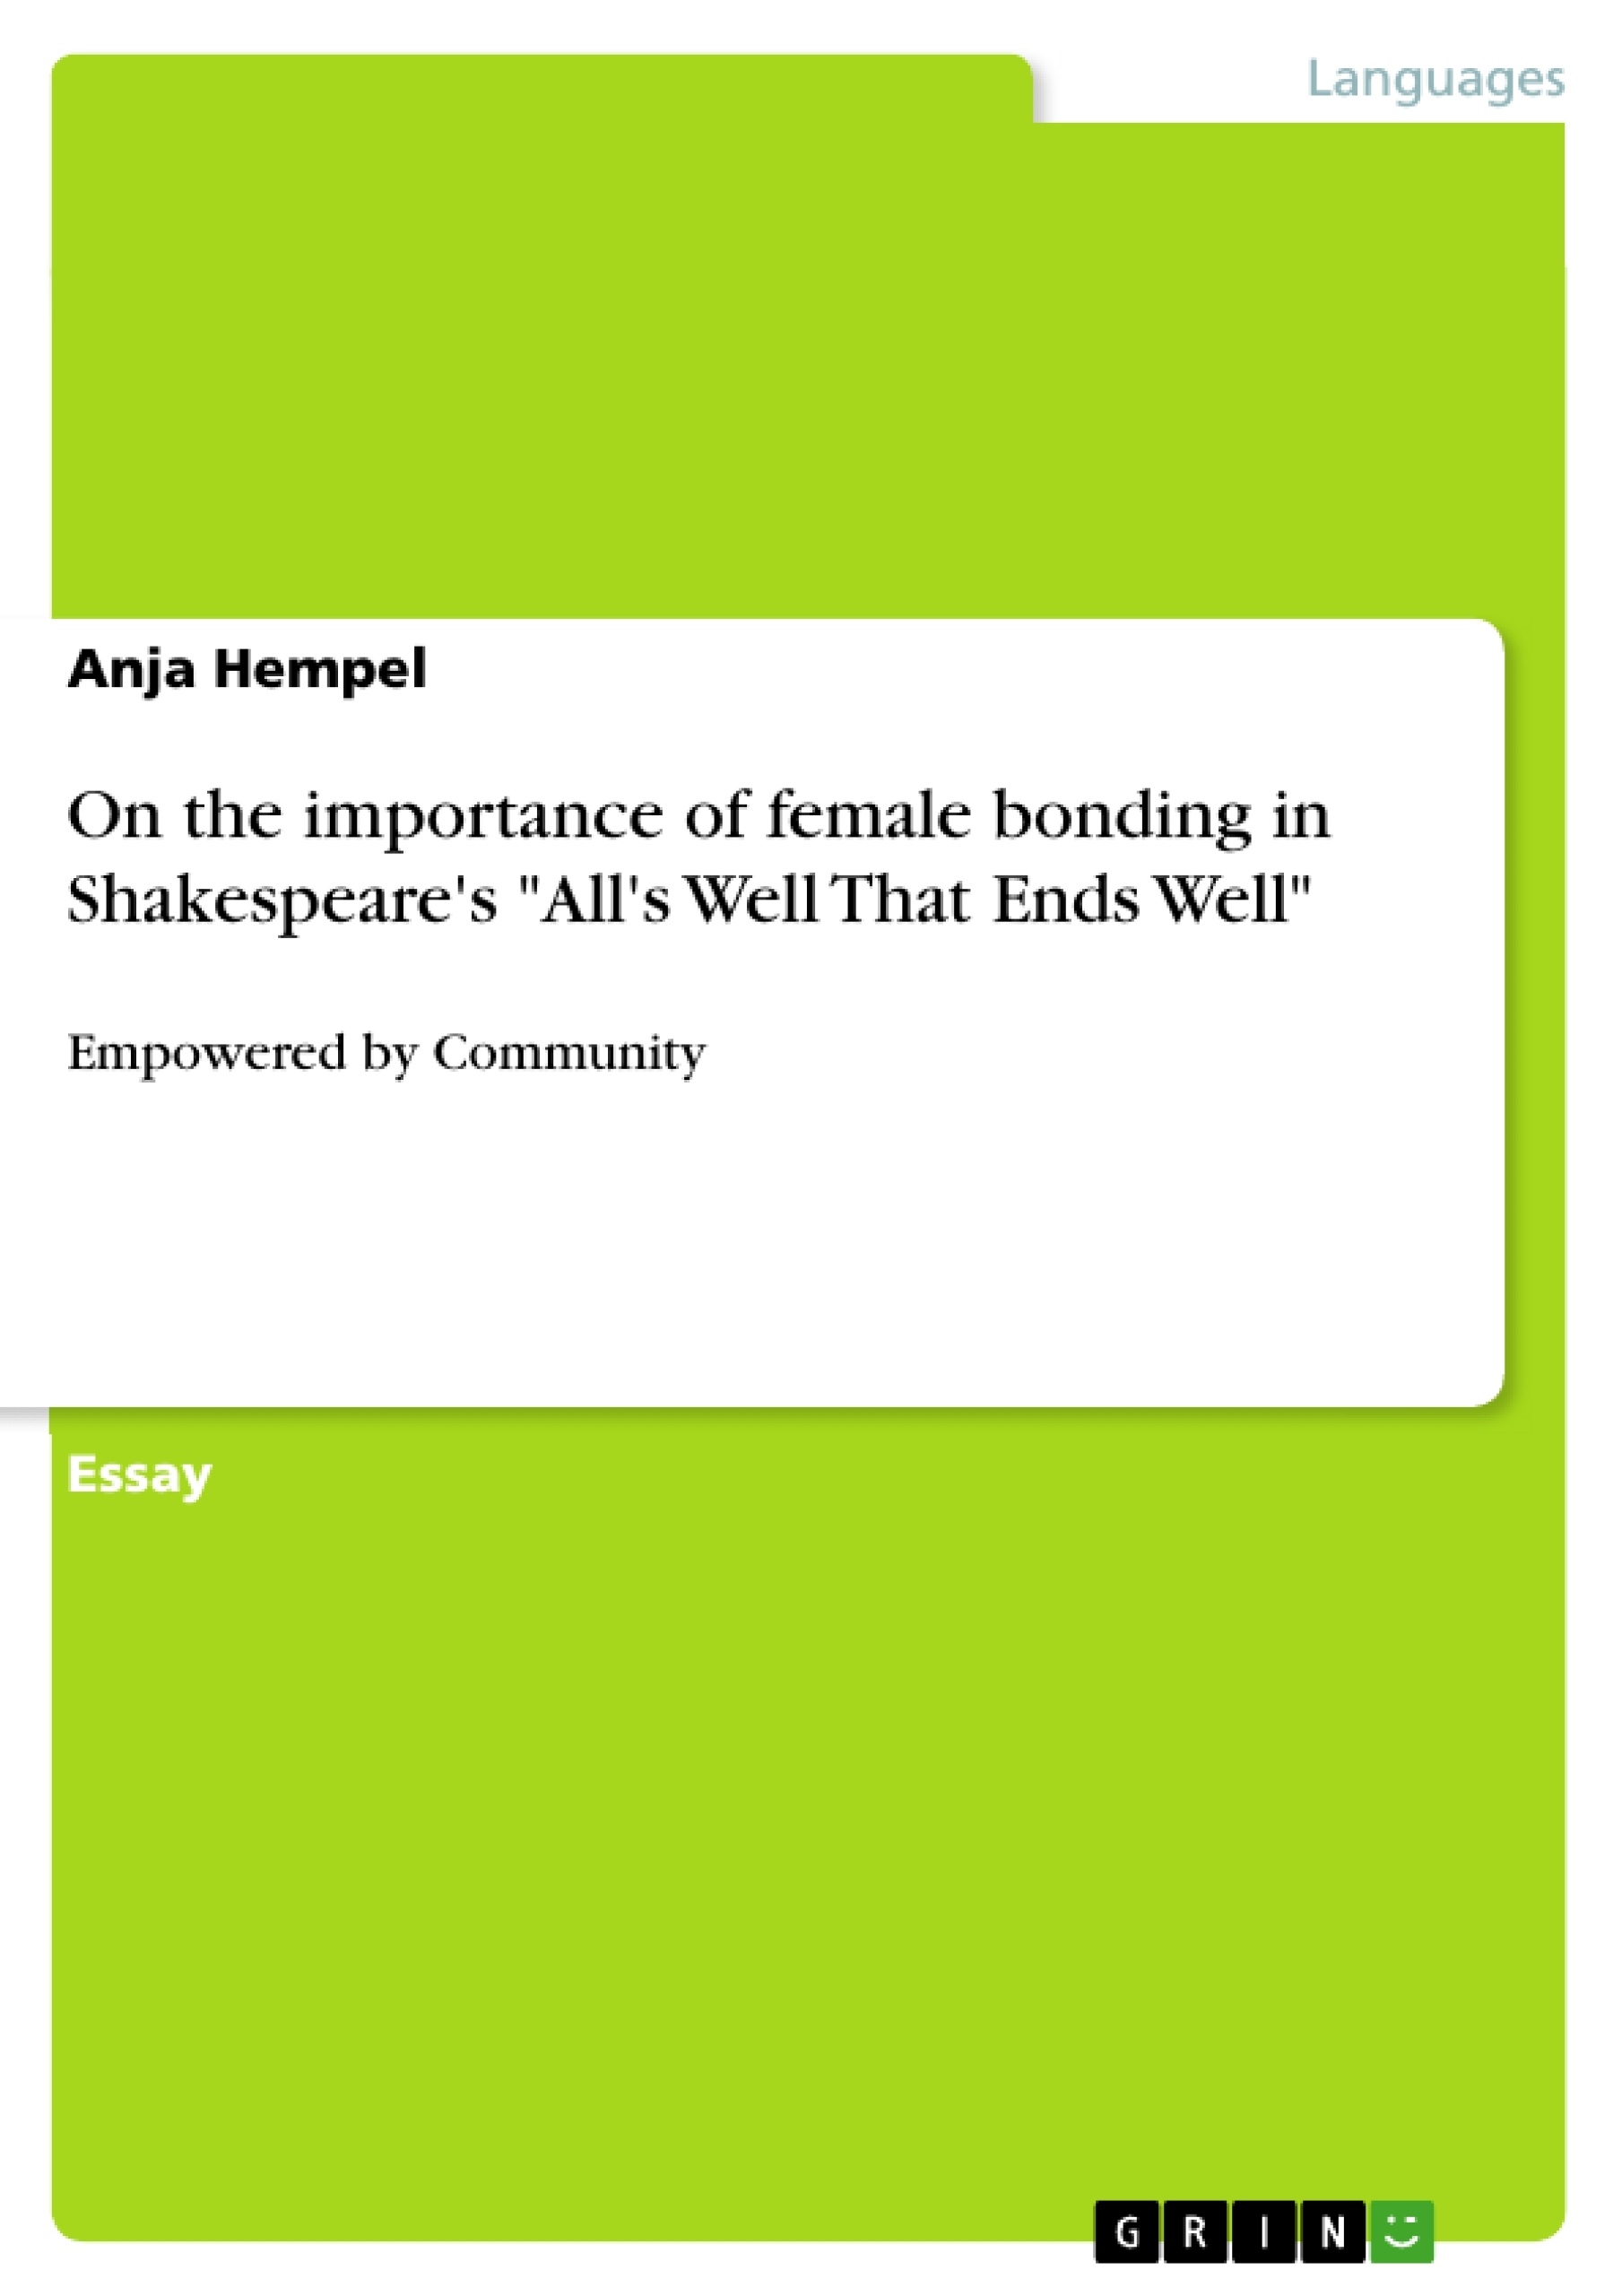 Title: On the importance of female bonding in Shakespeare's "All's Well That Ends Well"